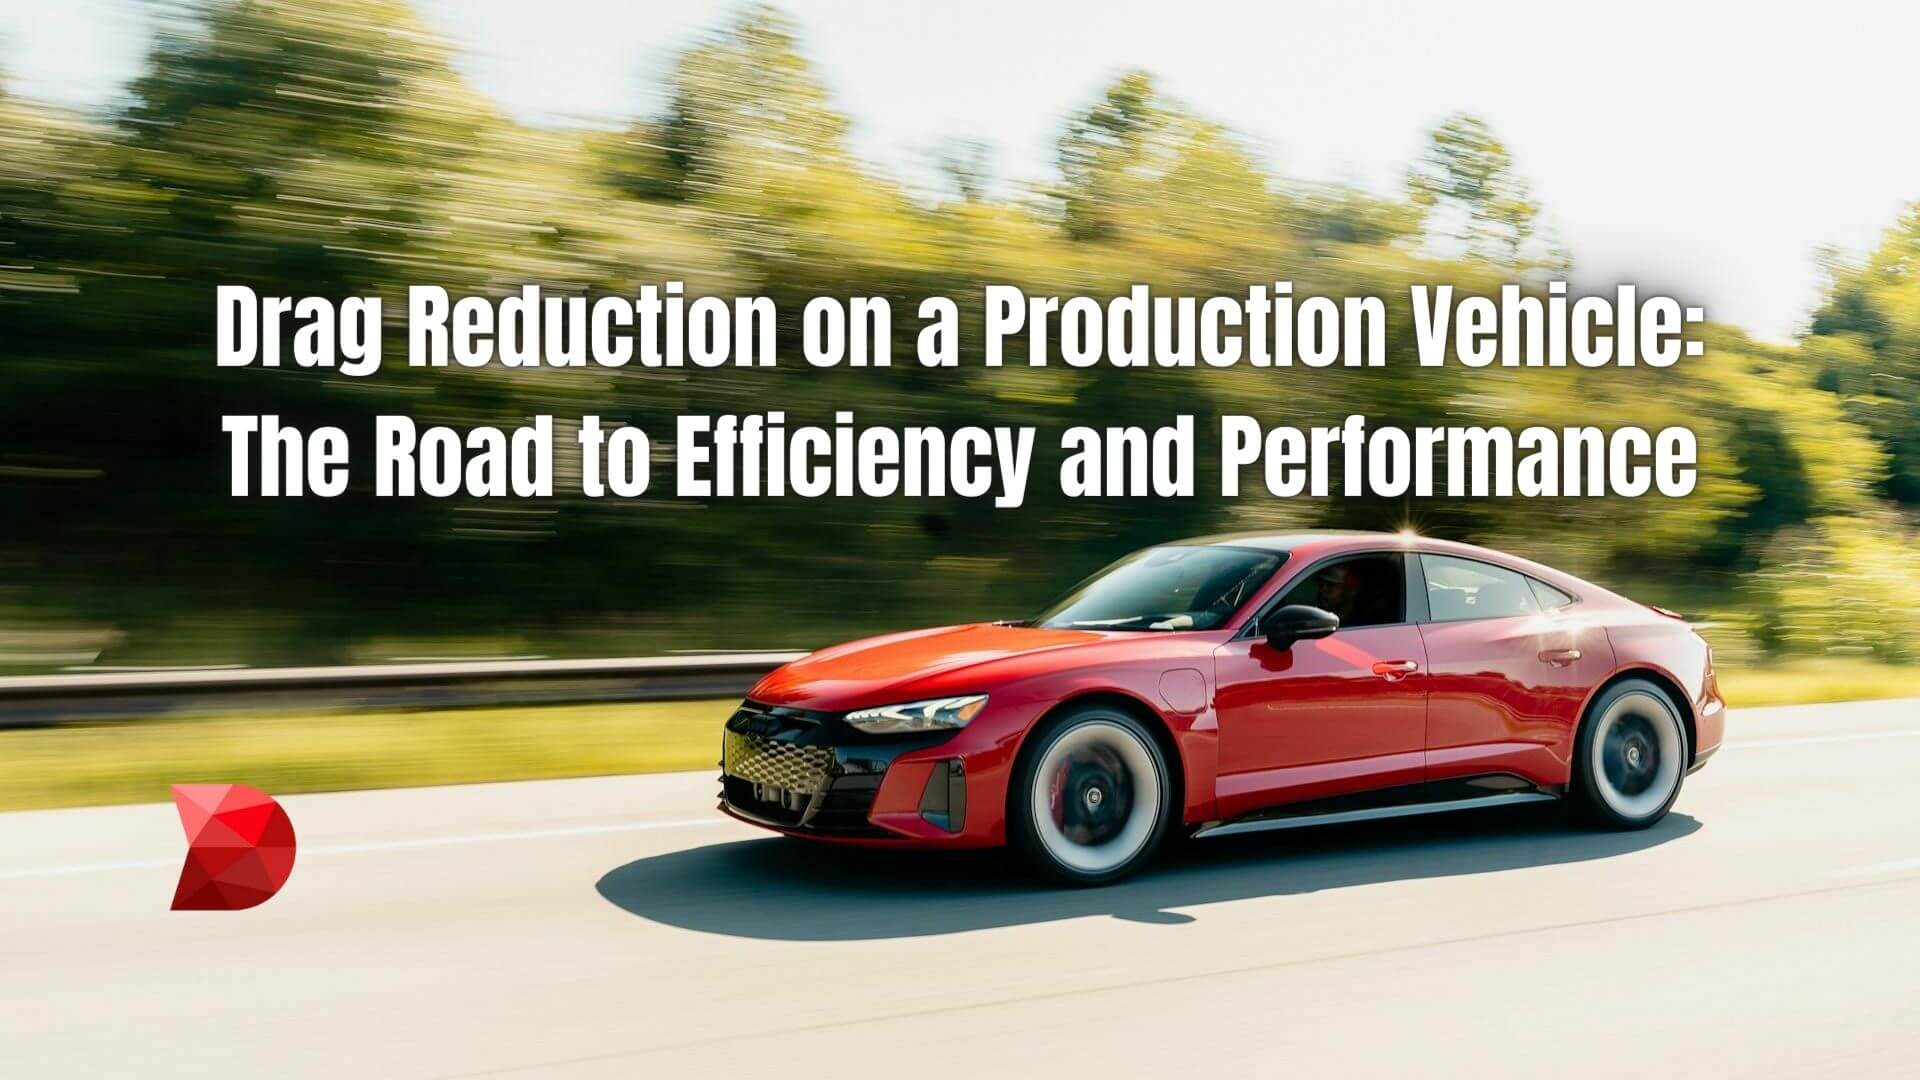 Boost efficiency and performance! Explore a data-driven approach to optimizing production vehicle performance through drag reduction.